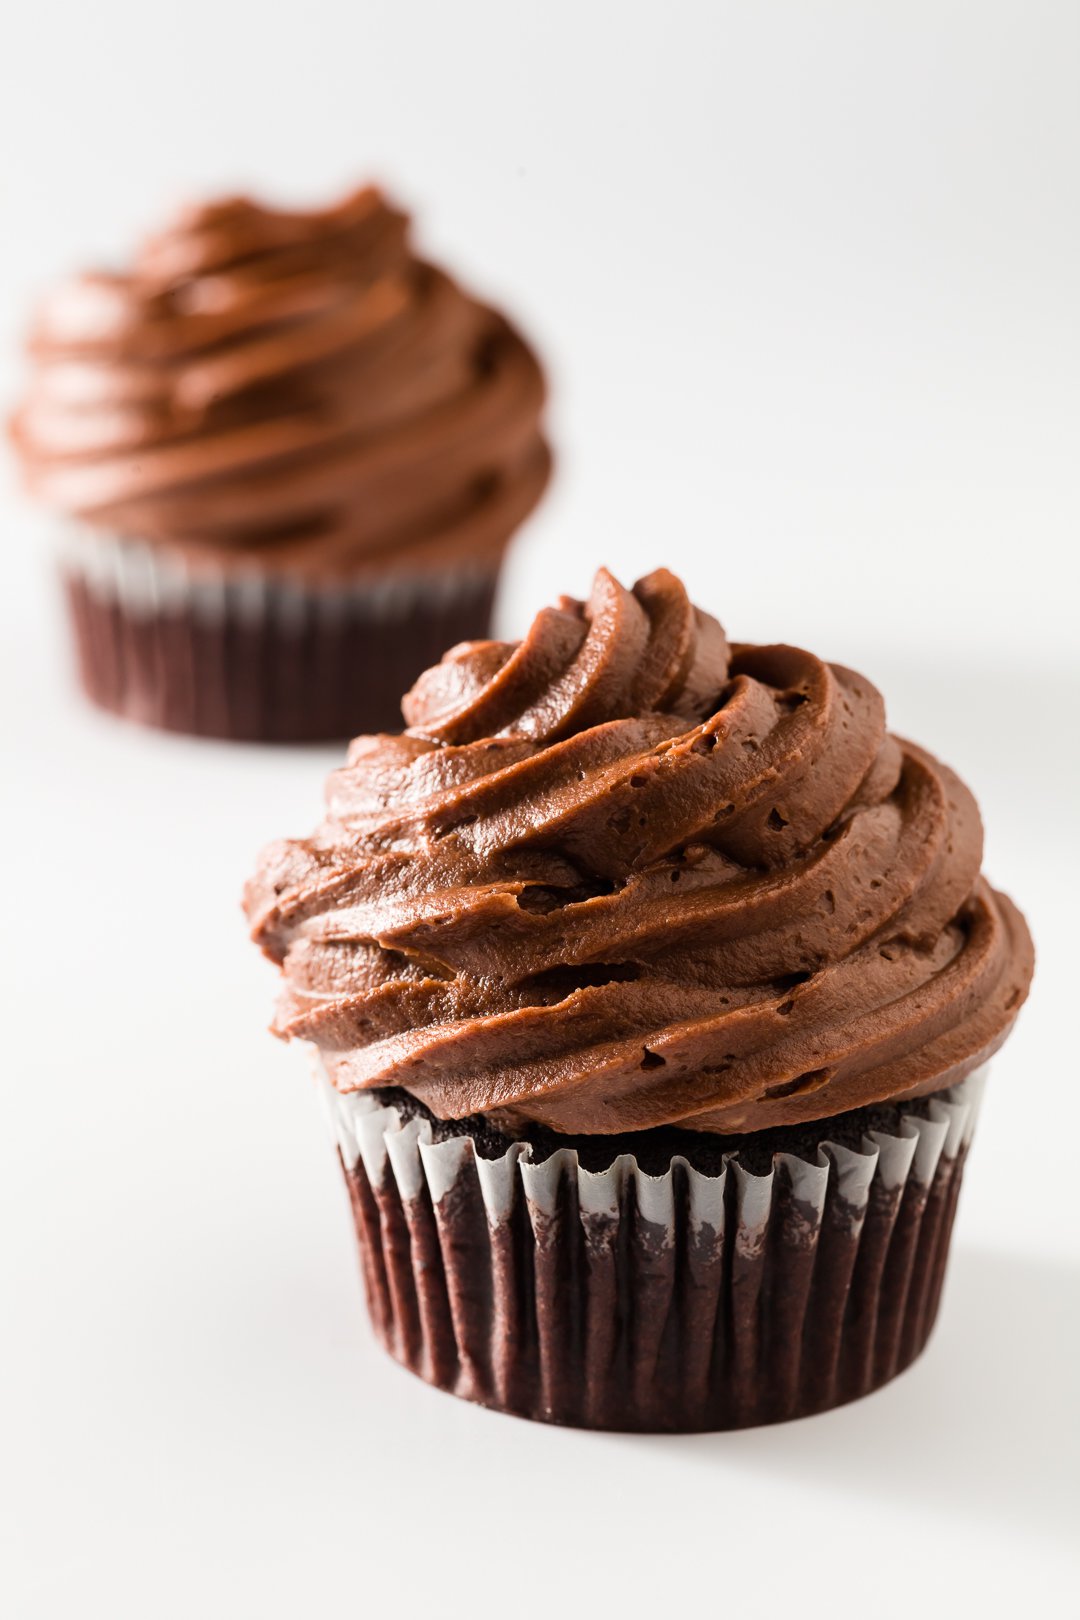 Two chocolate cupcakes on a white background